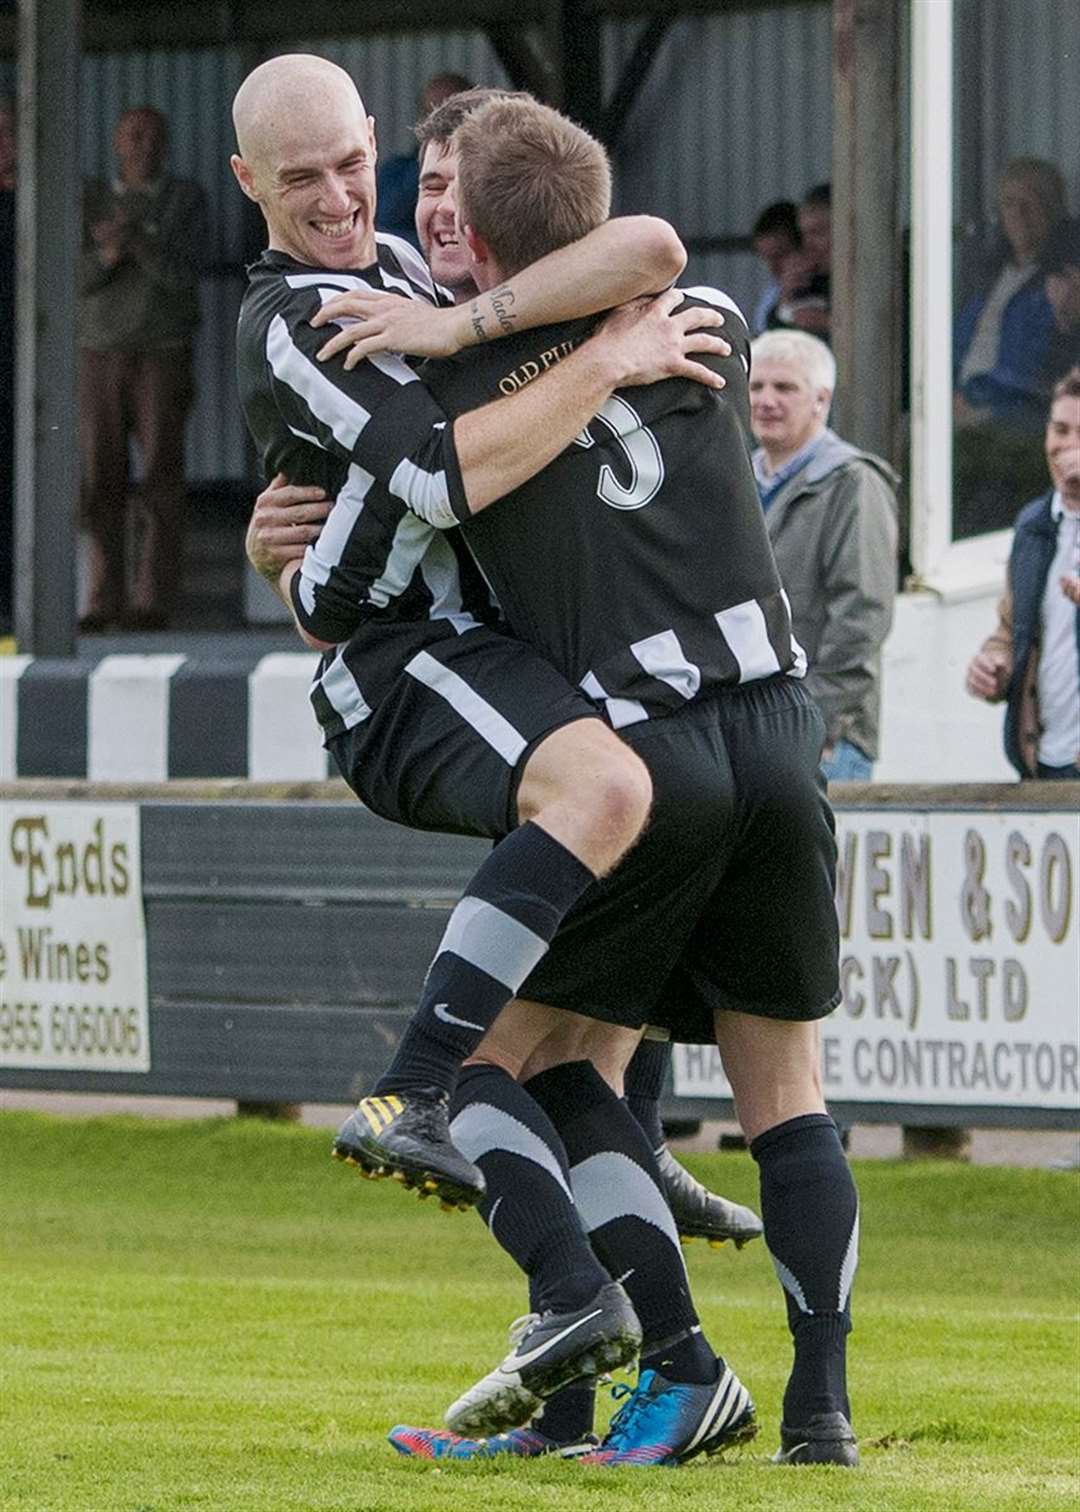 Gary Weir (left) celebrating another goal for Wick Academy at Harmsworth Park during the eventful 2012/13 Highland League campaign. Picture: Mel Roger